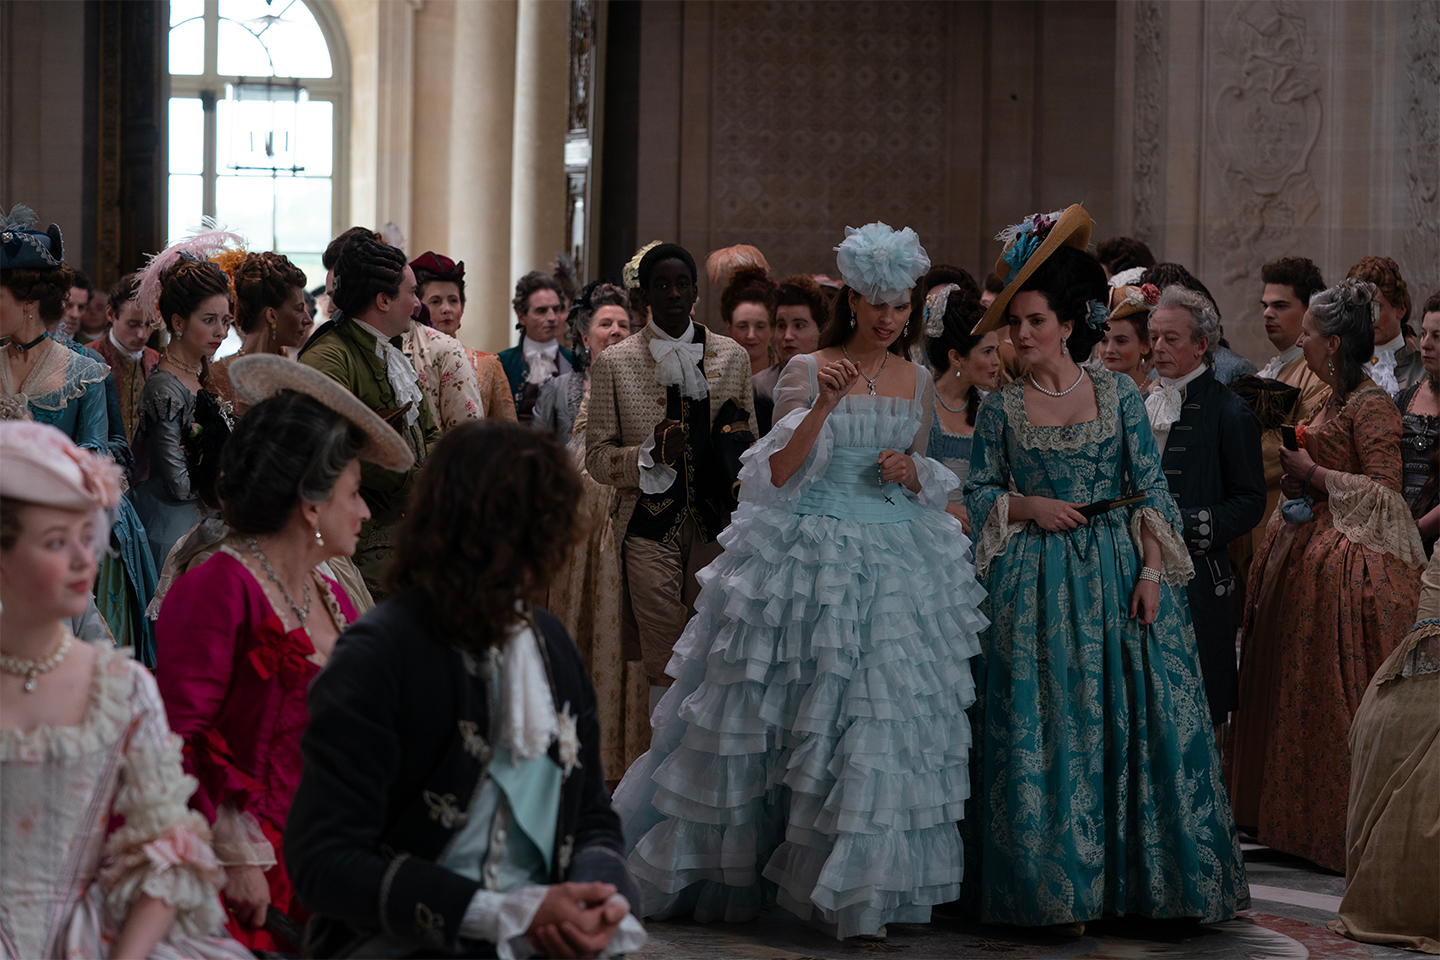 A behind-the-scenes moment of Maïwenn's latest film, Jeanne Du Barry. Photo: Stephanie Branchu. Courtesy of Chanel